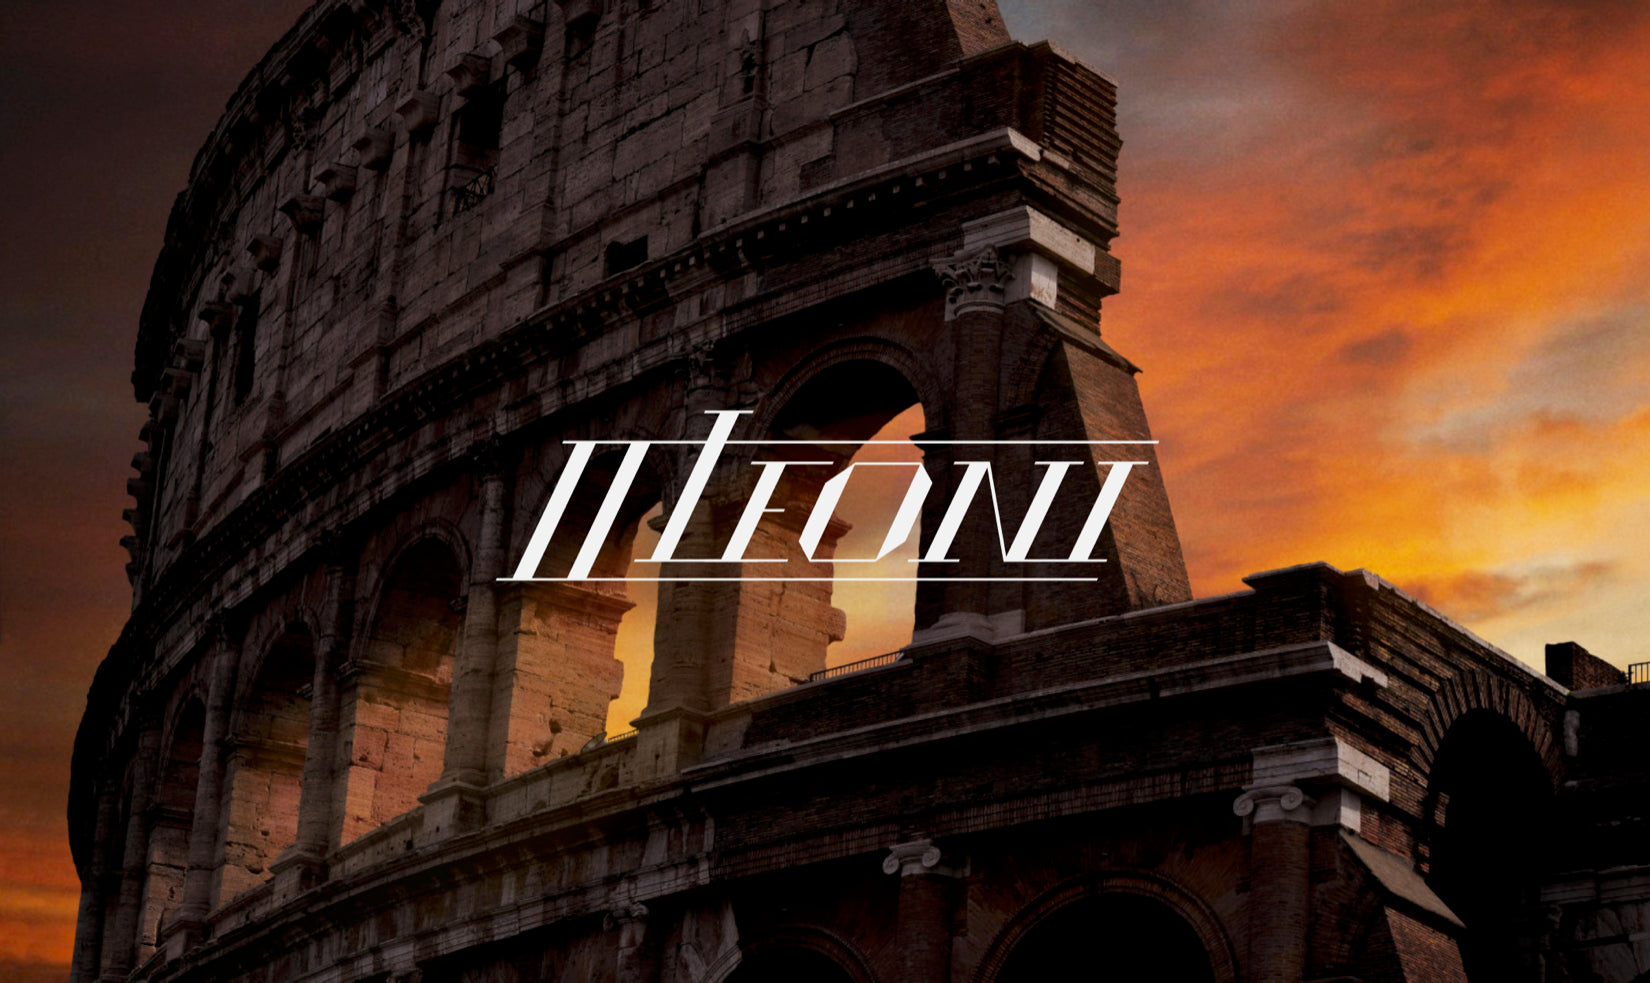 The Colosseum at dawn or dusk with the II Leoni Text Logo superimposed on top